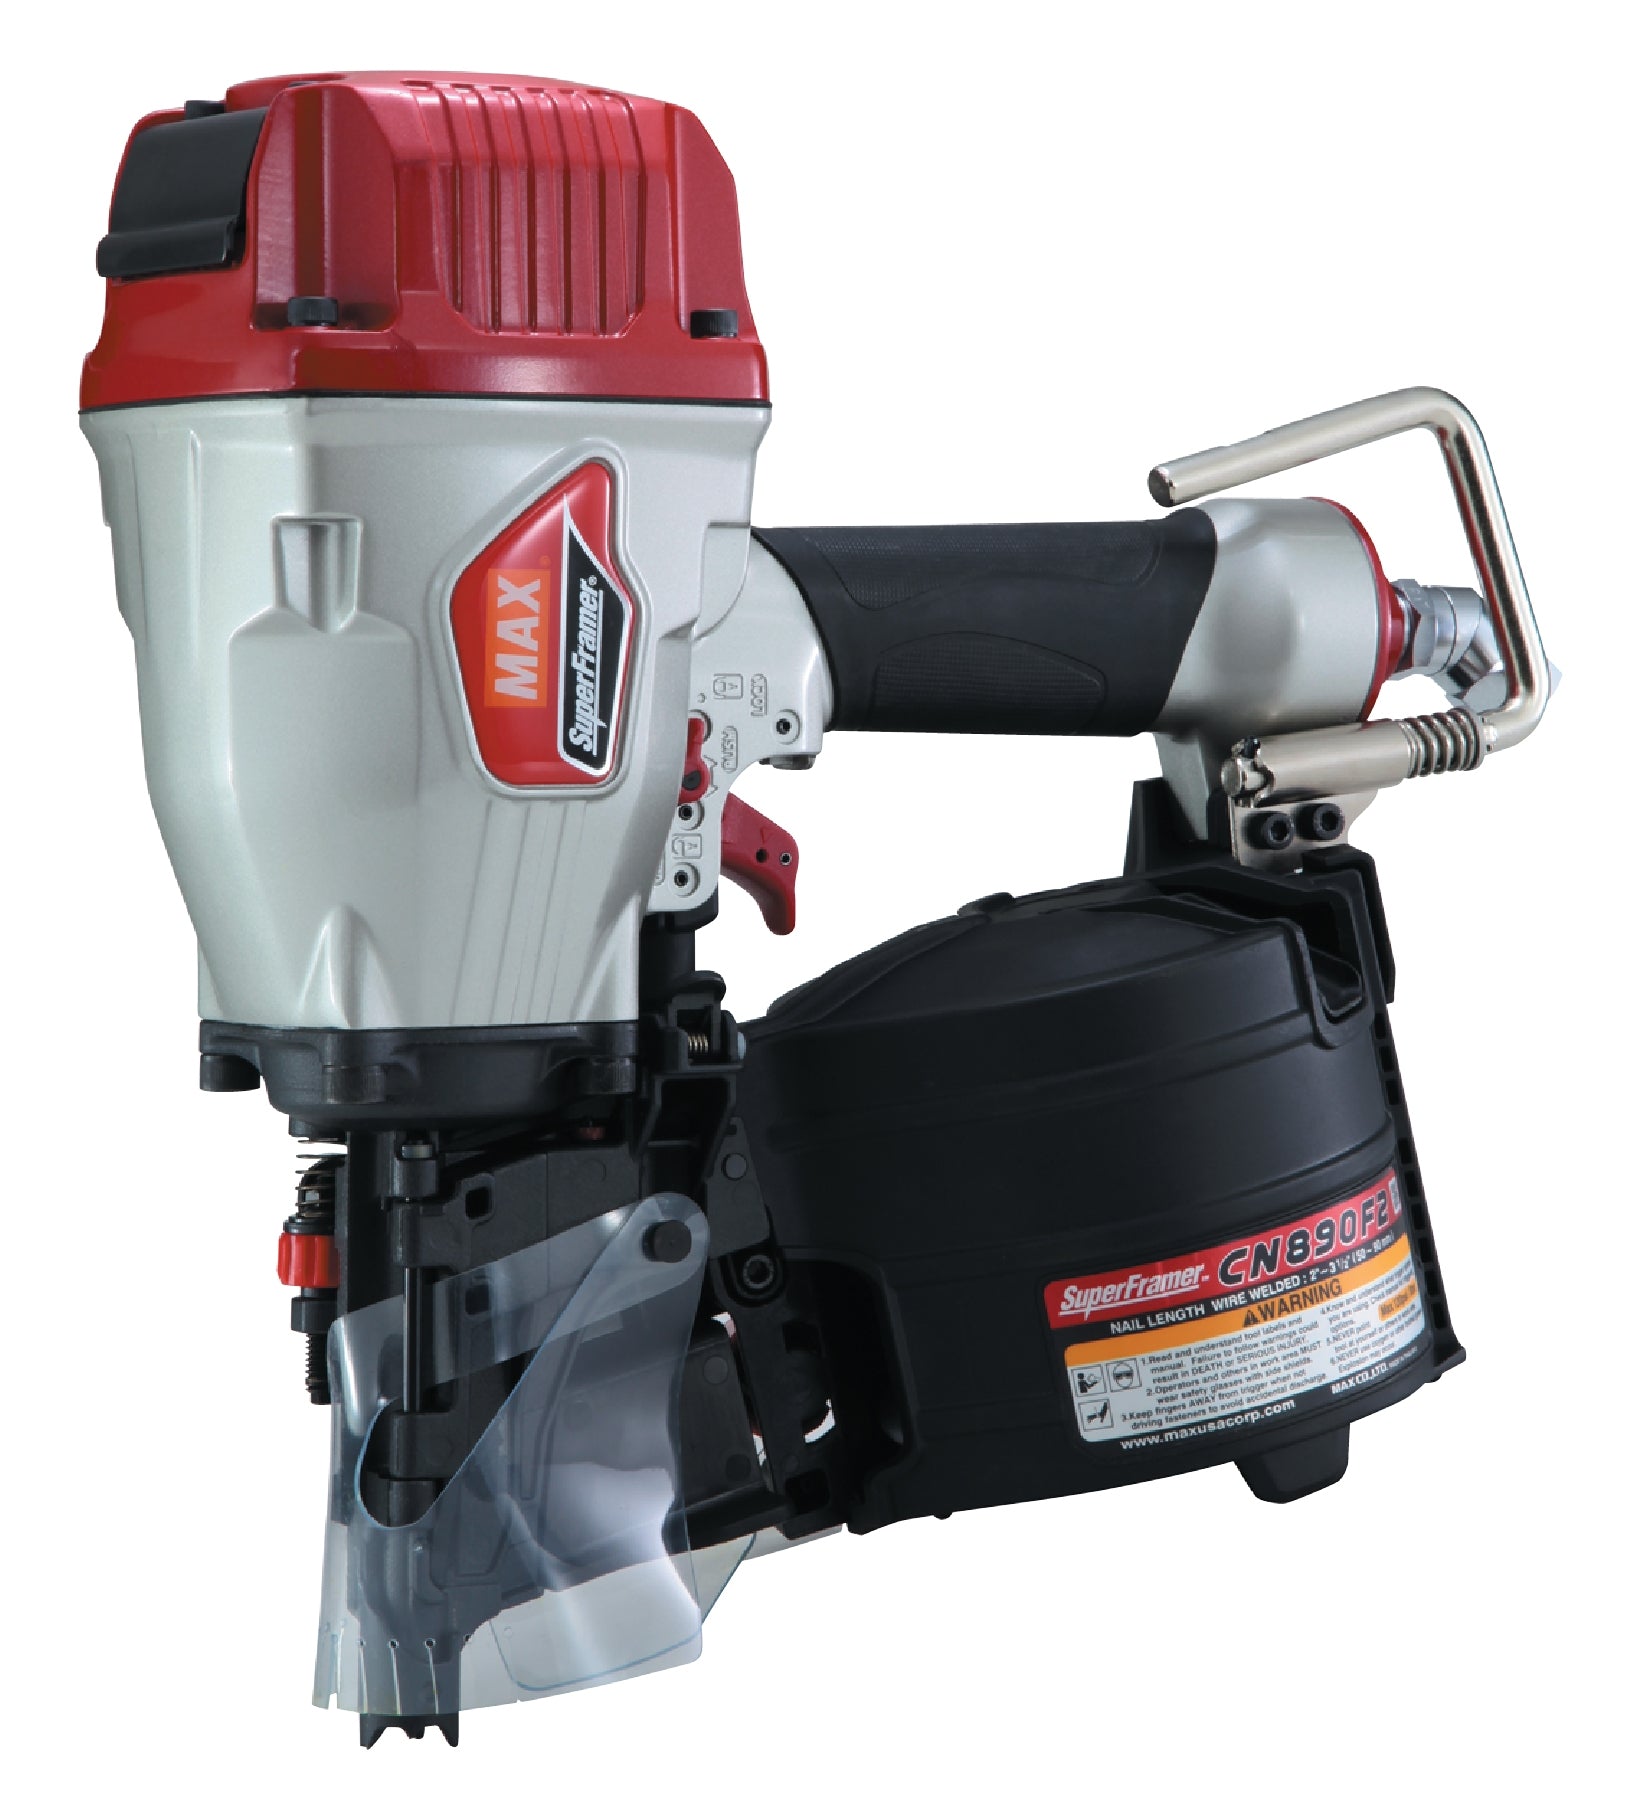 Max CN890F2 15-Degree 3-1/2" Wire Weld Collated SuperFramer Coil Framing Nailer